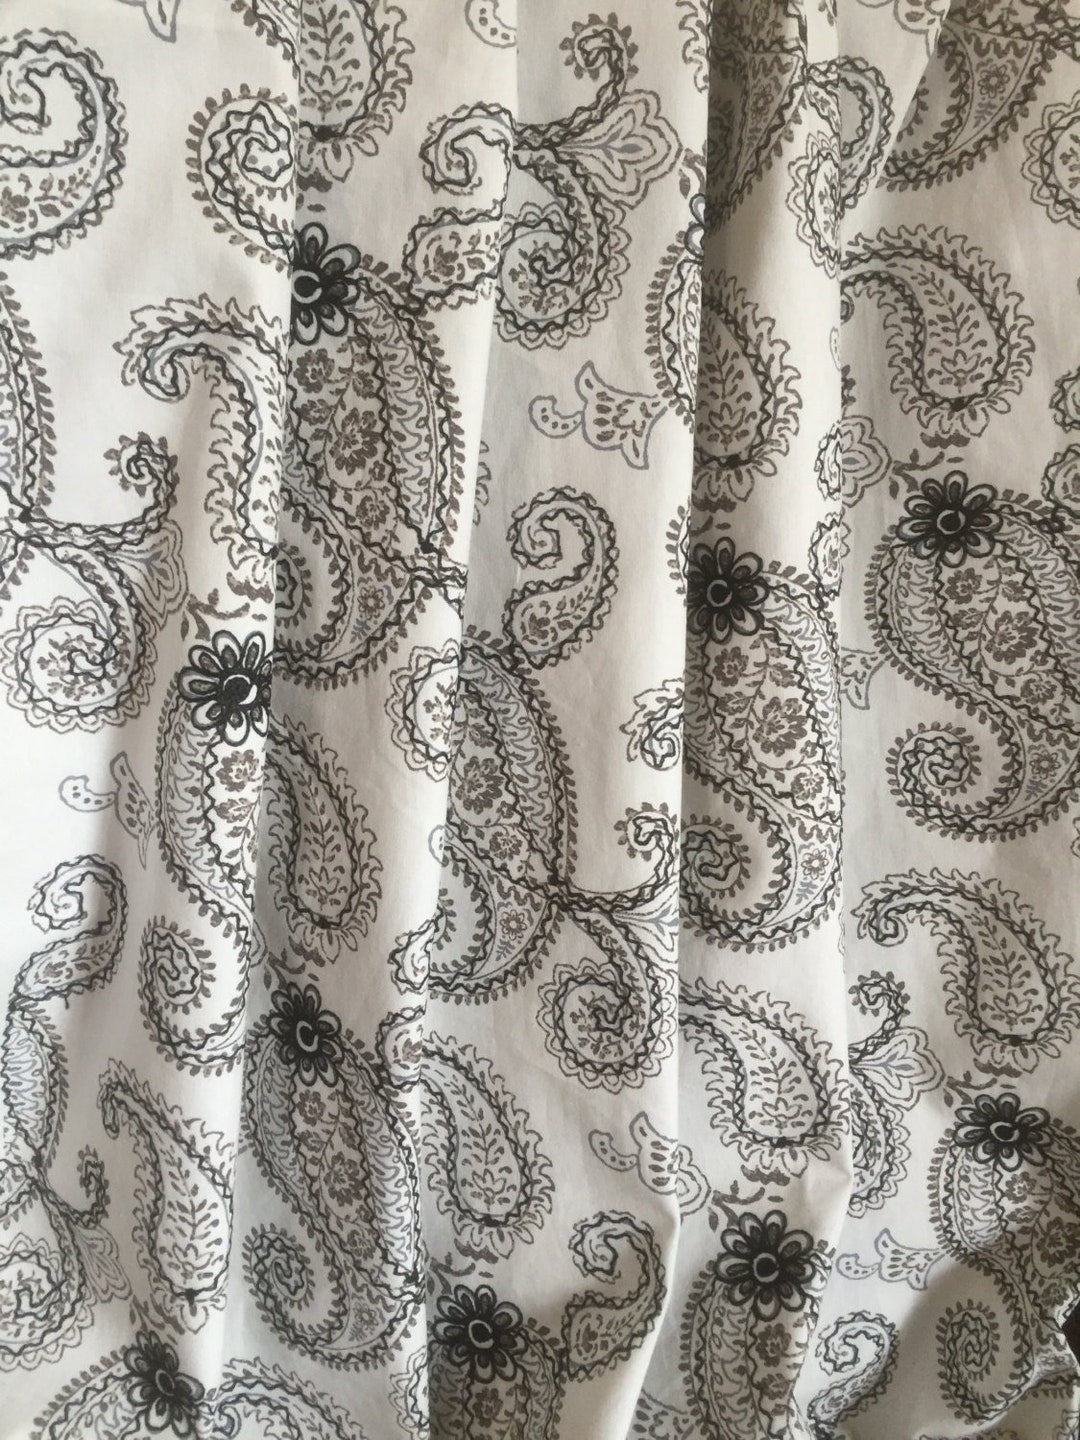 Embroidered Paisley Curtain Panels Hand Painted Design - Etsy